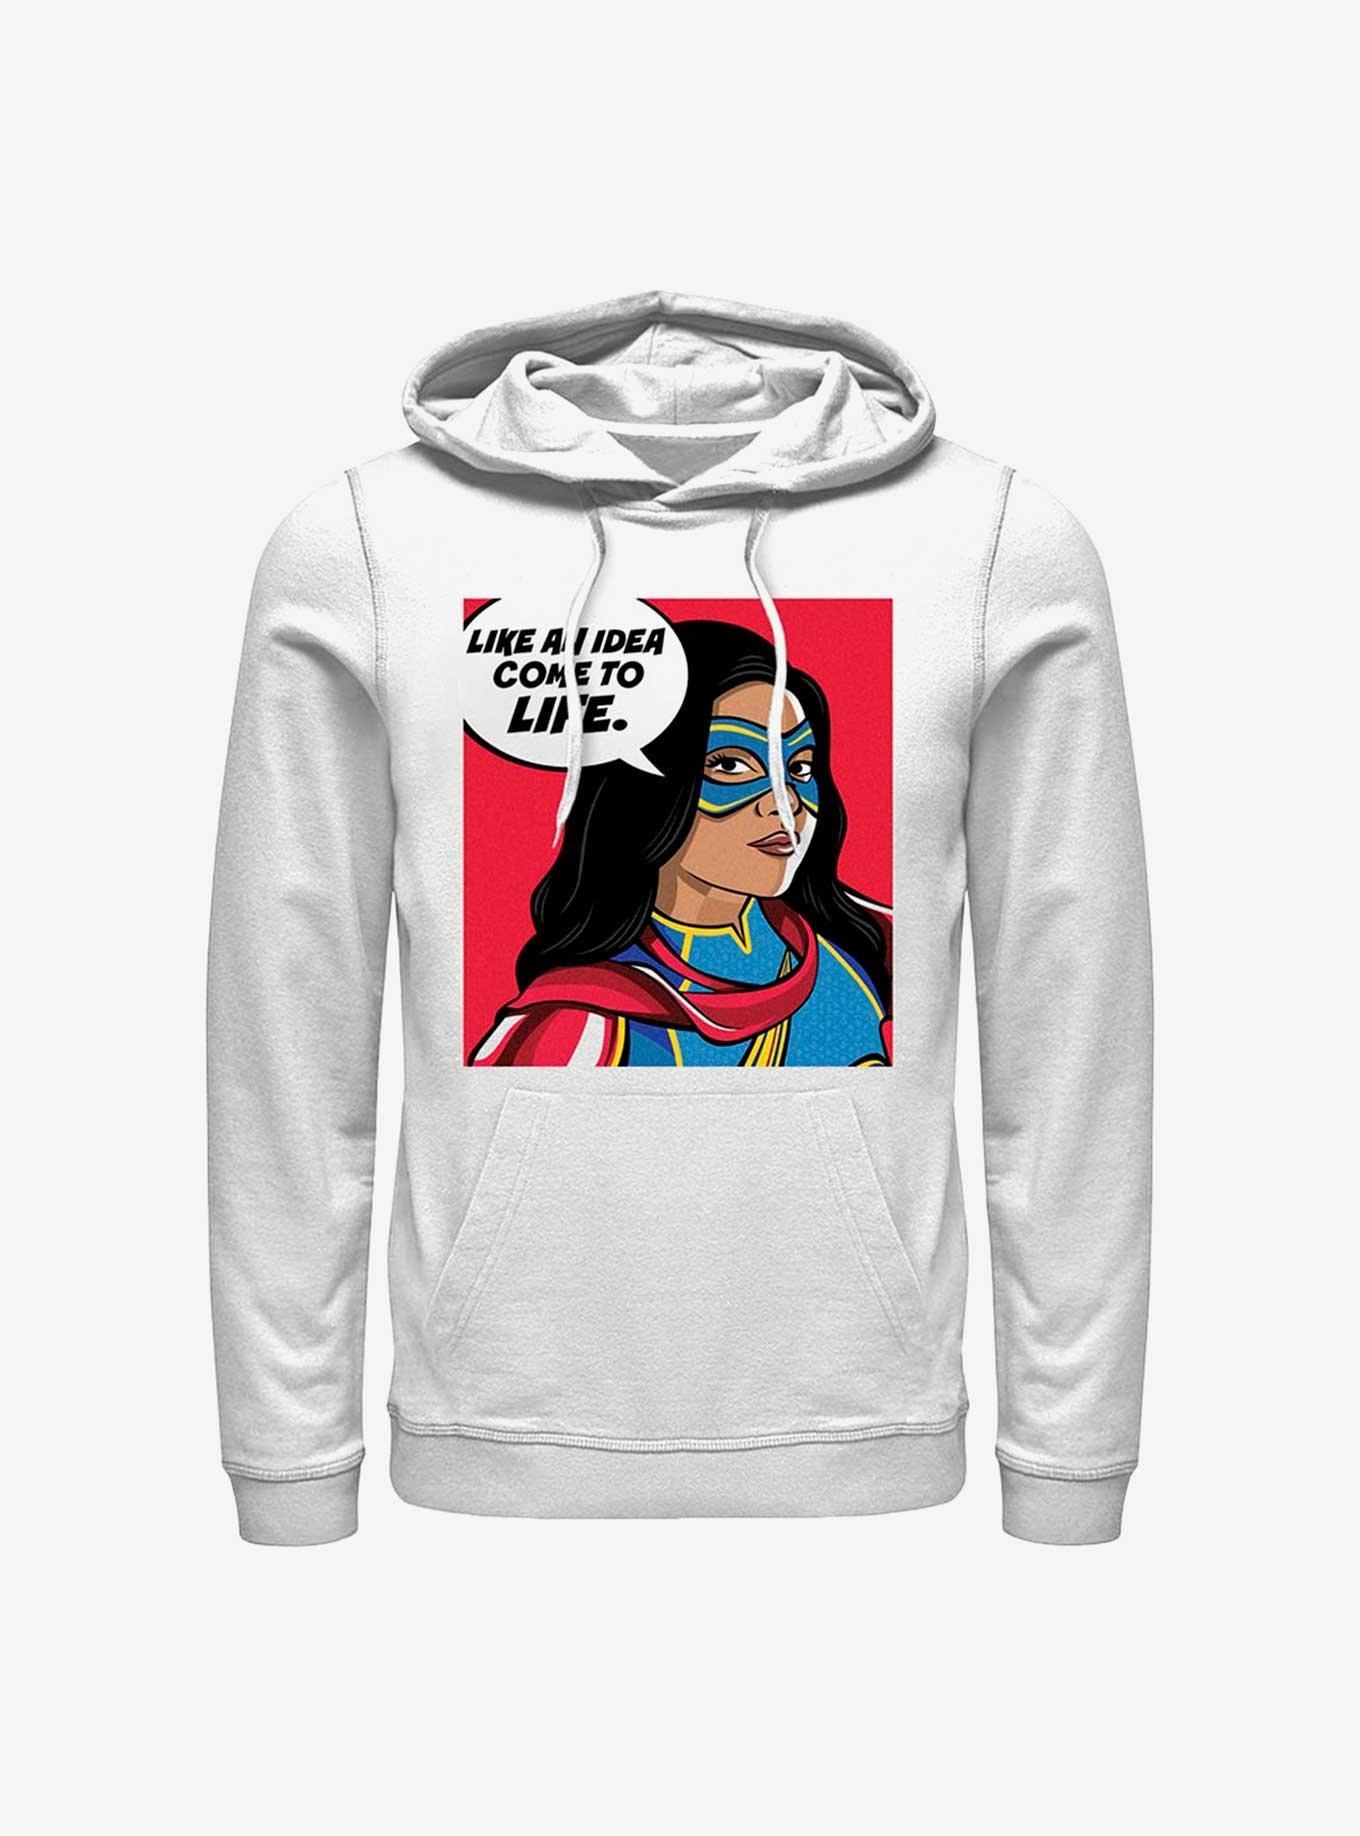 Marvel Ms. Marvel Idea Come To Life Hoodie, WHITE, hi-res